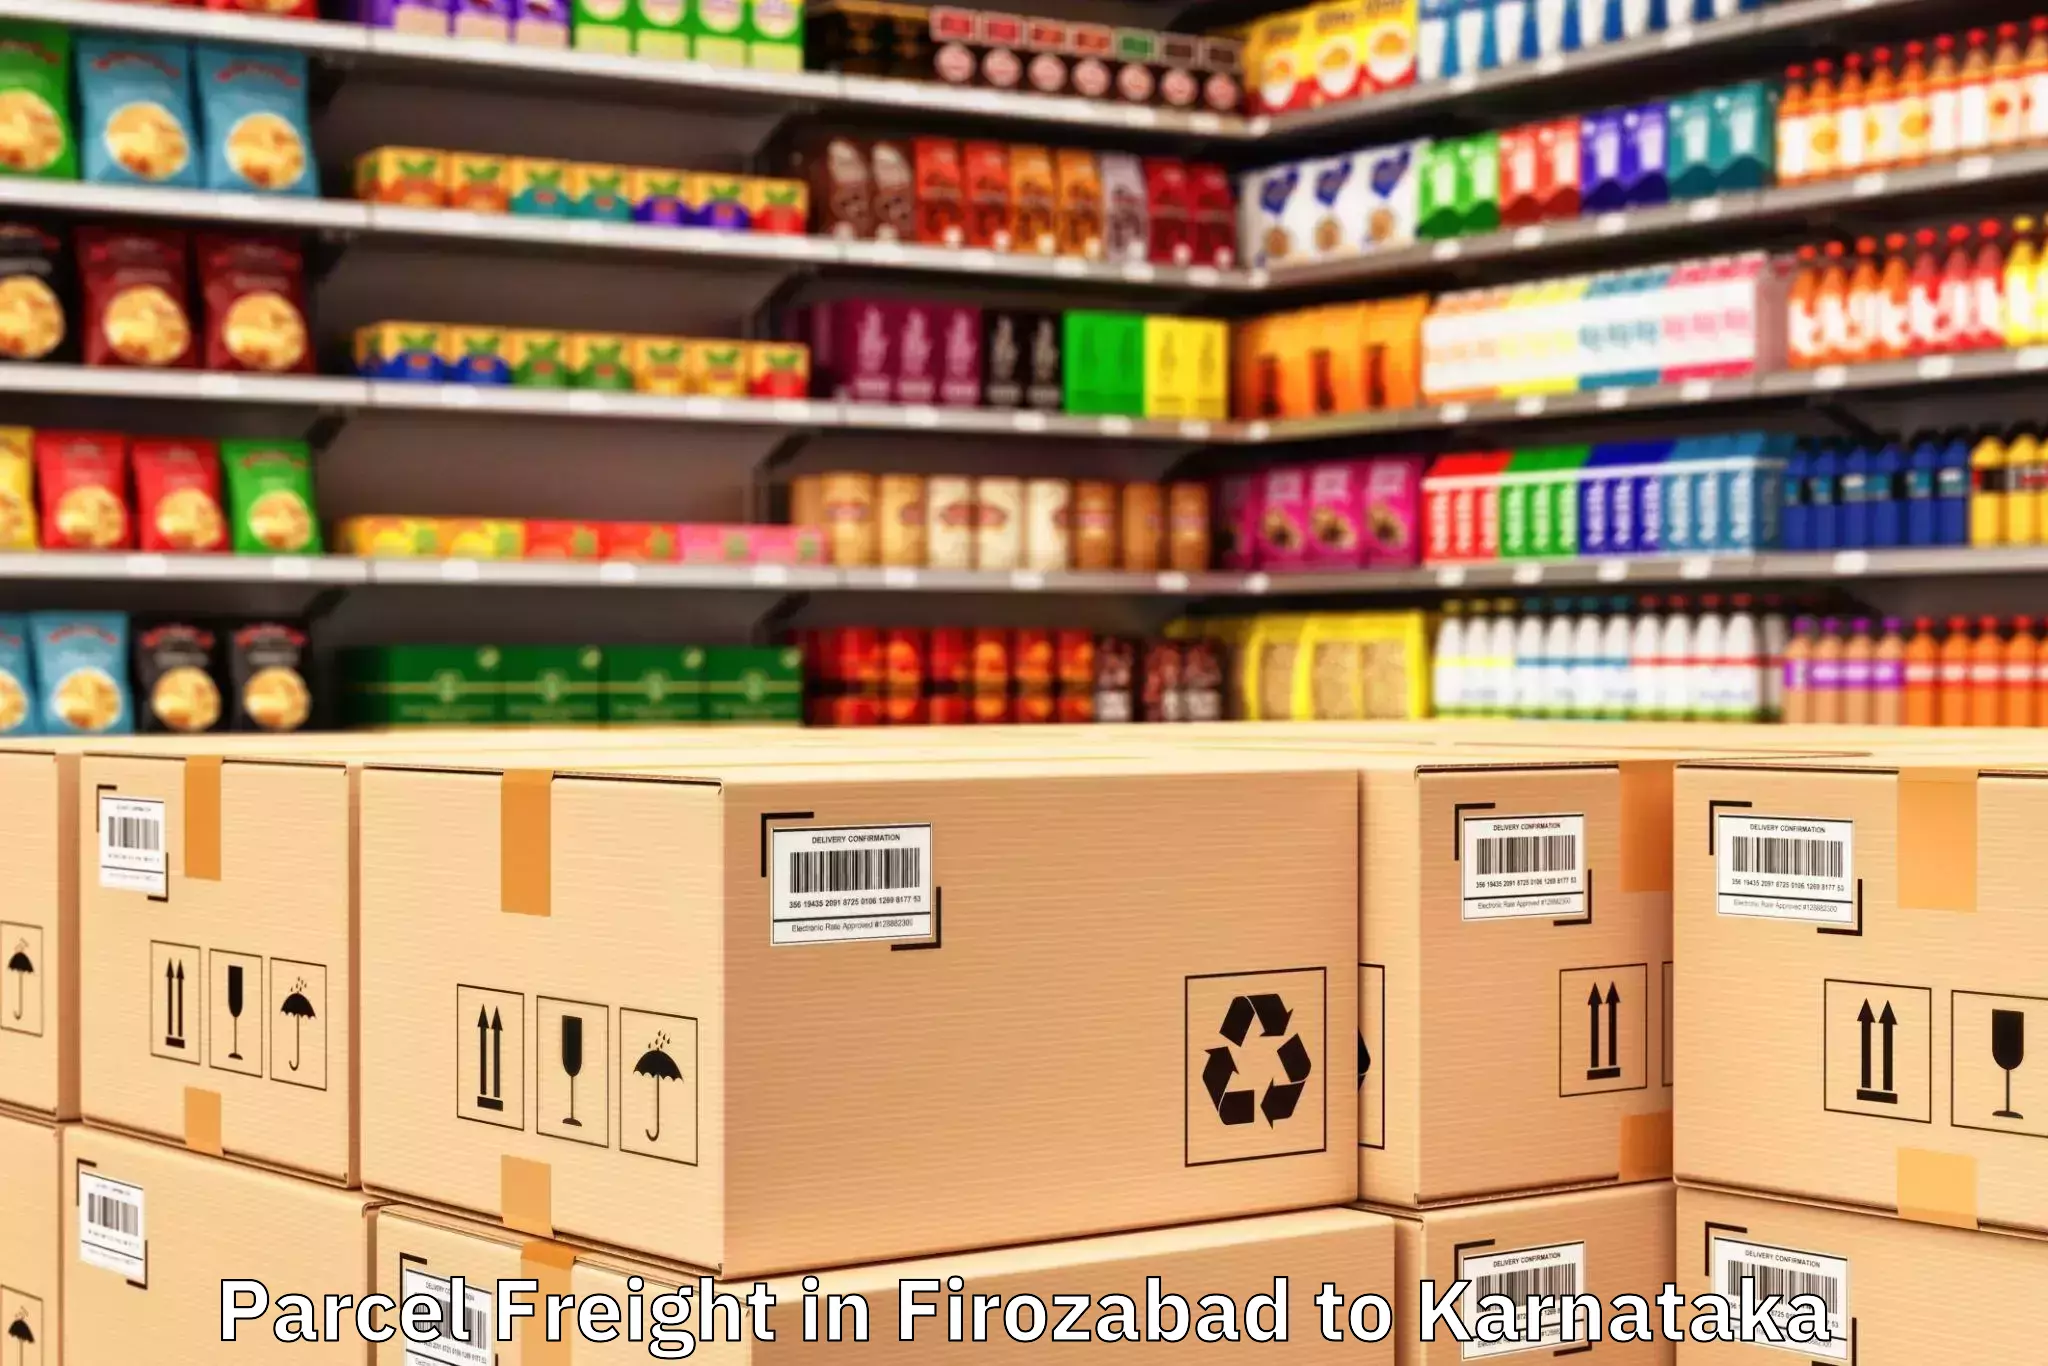 Discover Firozabad to Hagaribommanahalli Parcel Freight